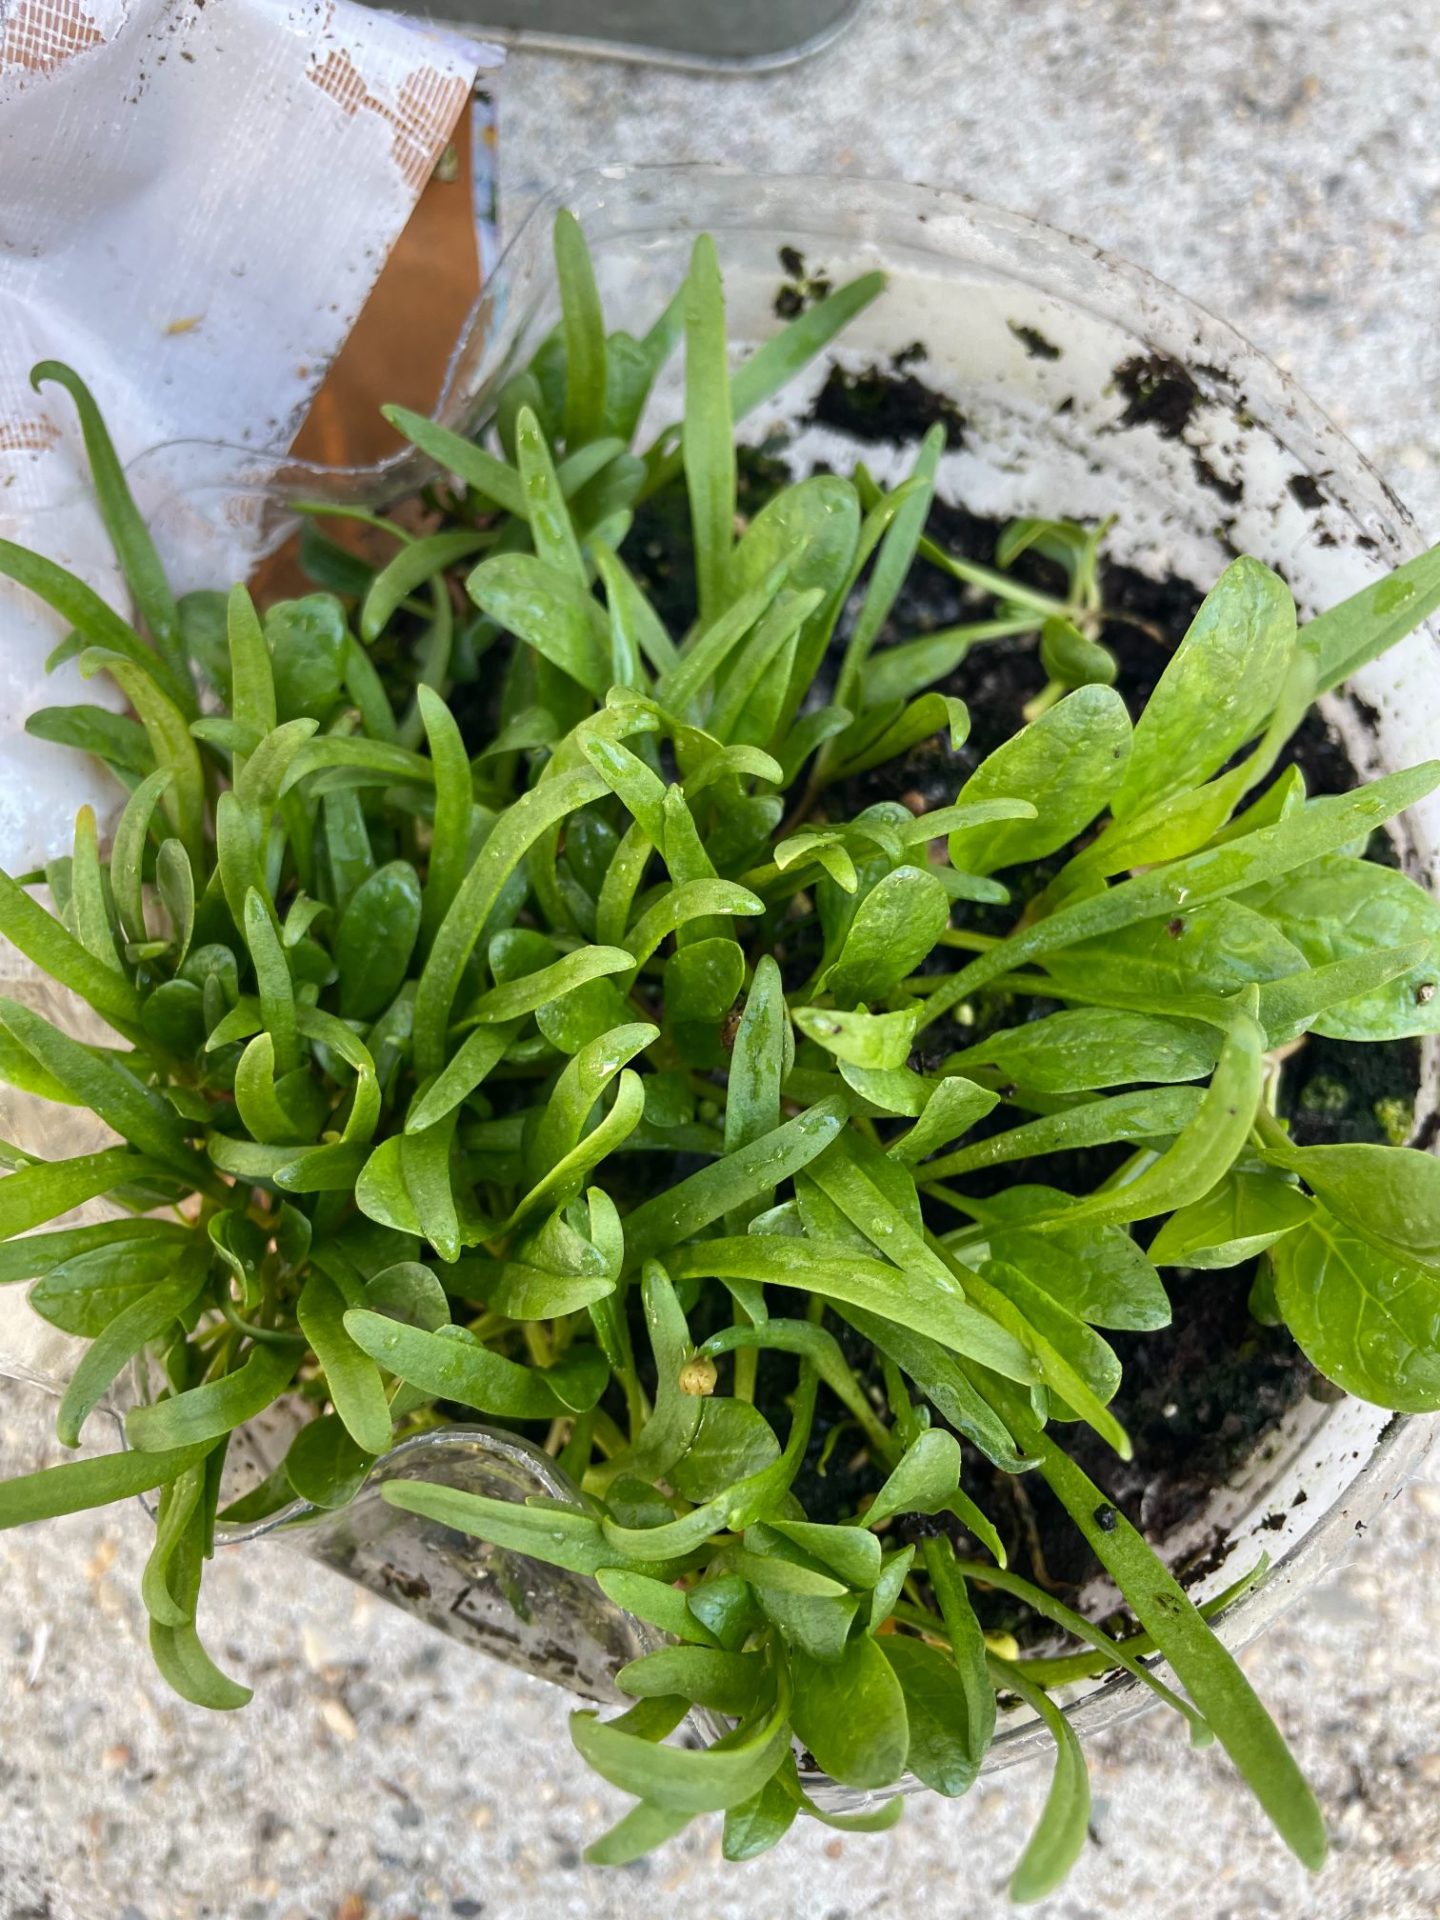 Spinach seedlings grow clustered together in an opened water jug.